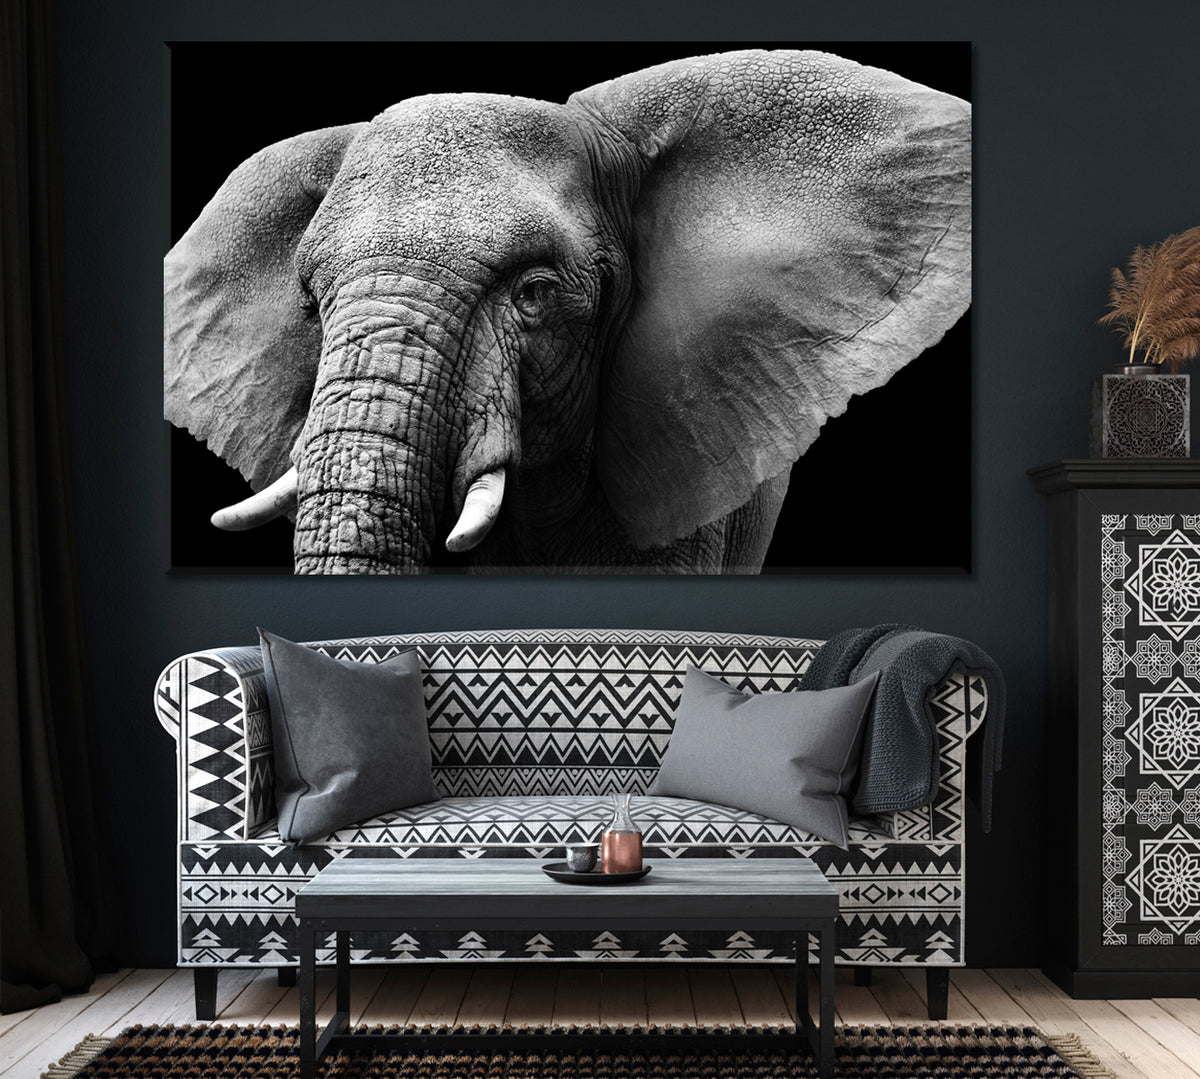 Elephant in Black and White Canvas Print ArtLexy 1 Panel 24"x16" inches 